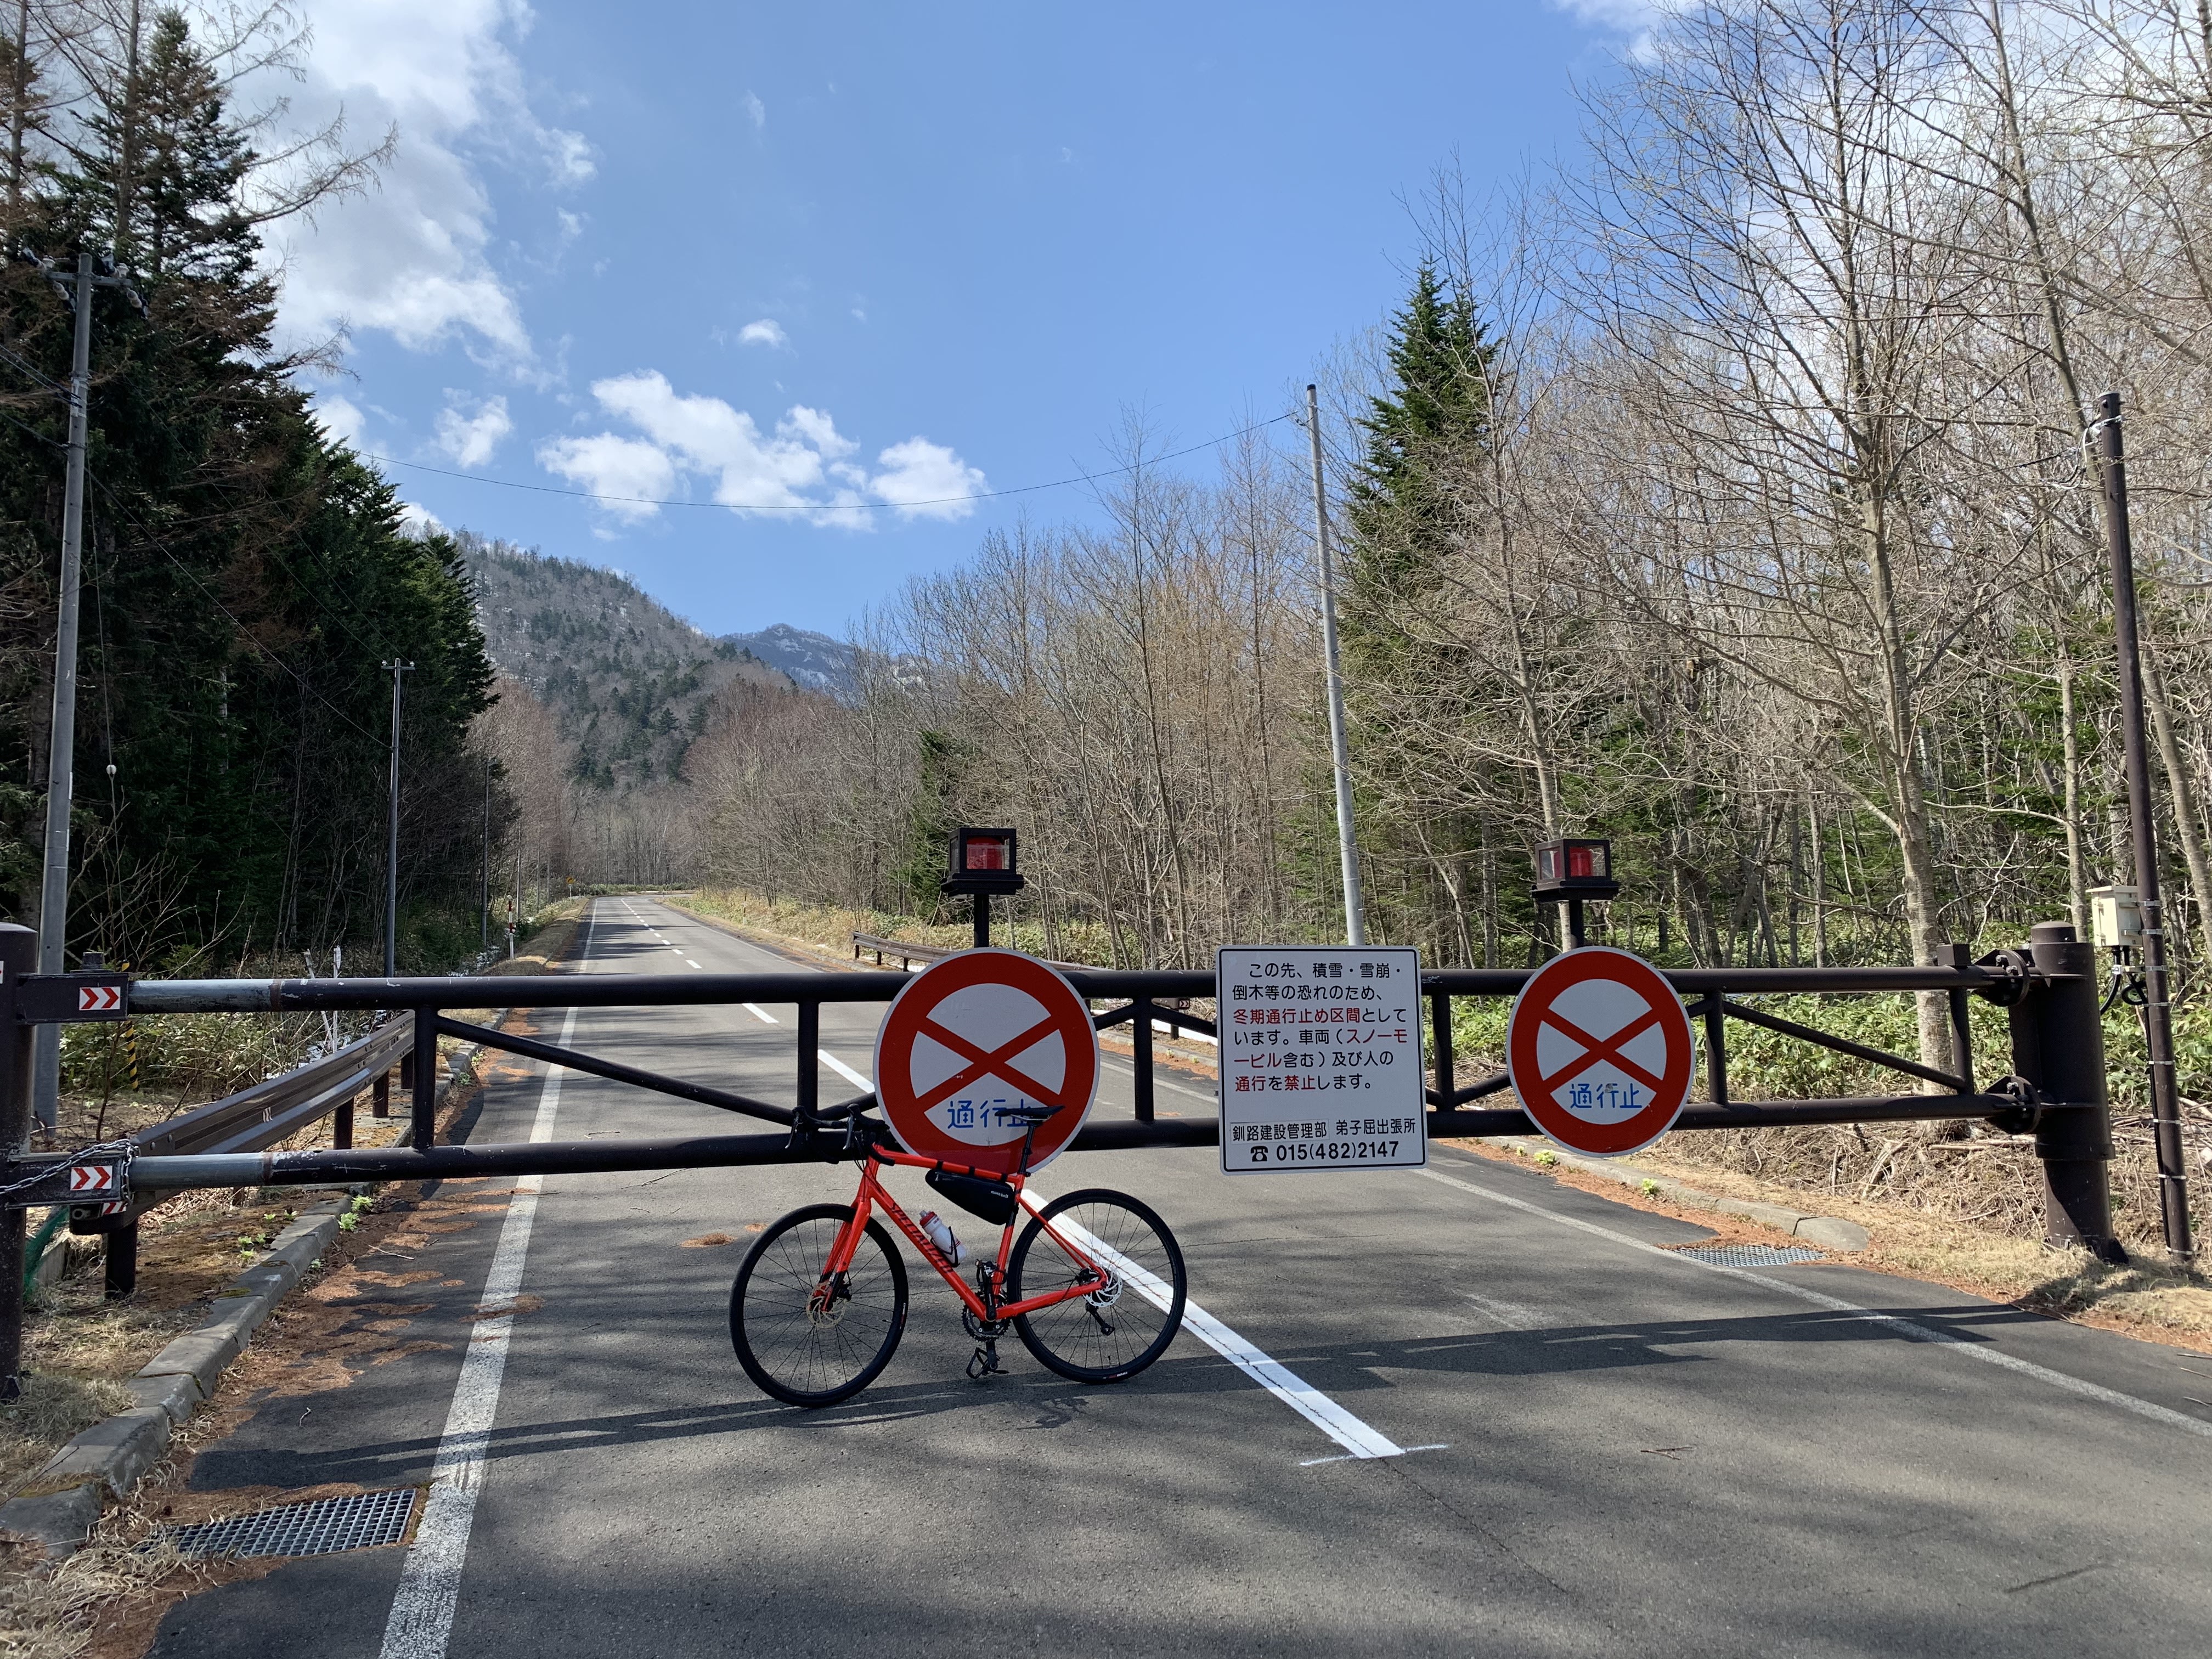 A road closure on the road leading to Tsubetsu Pass.